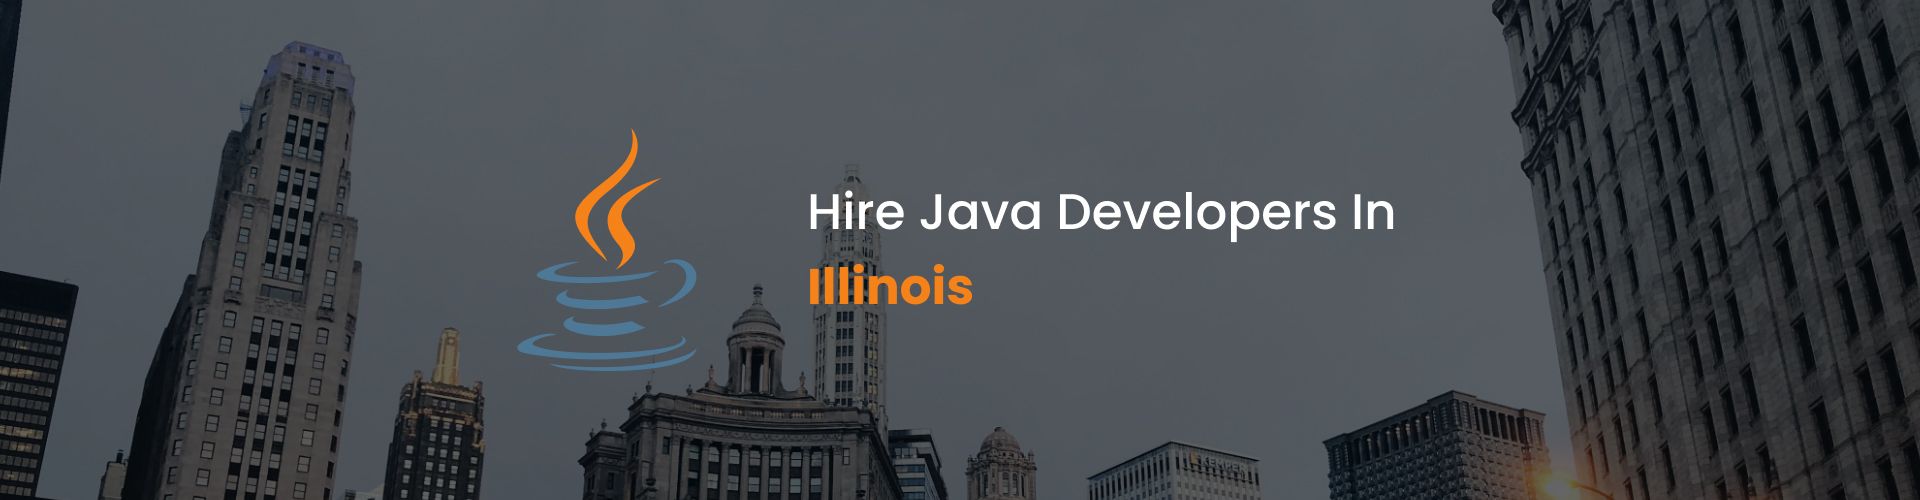 hire java developers in illinois